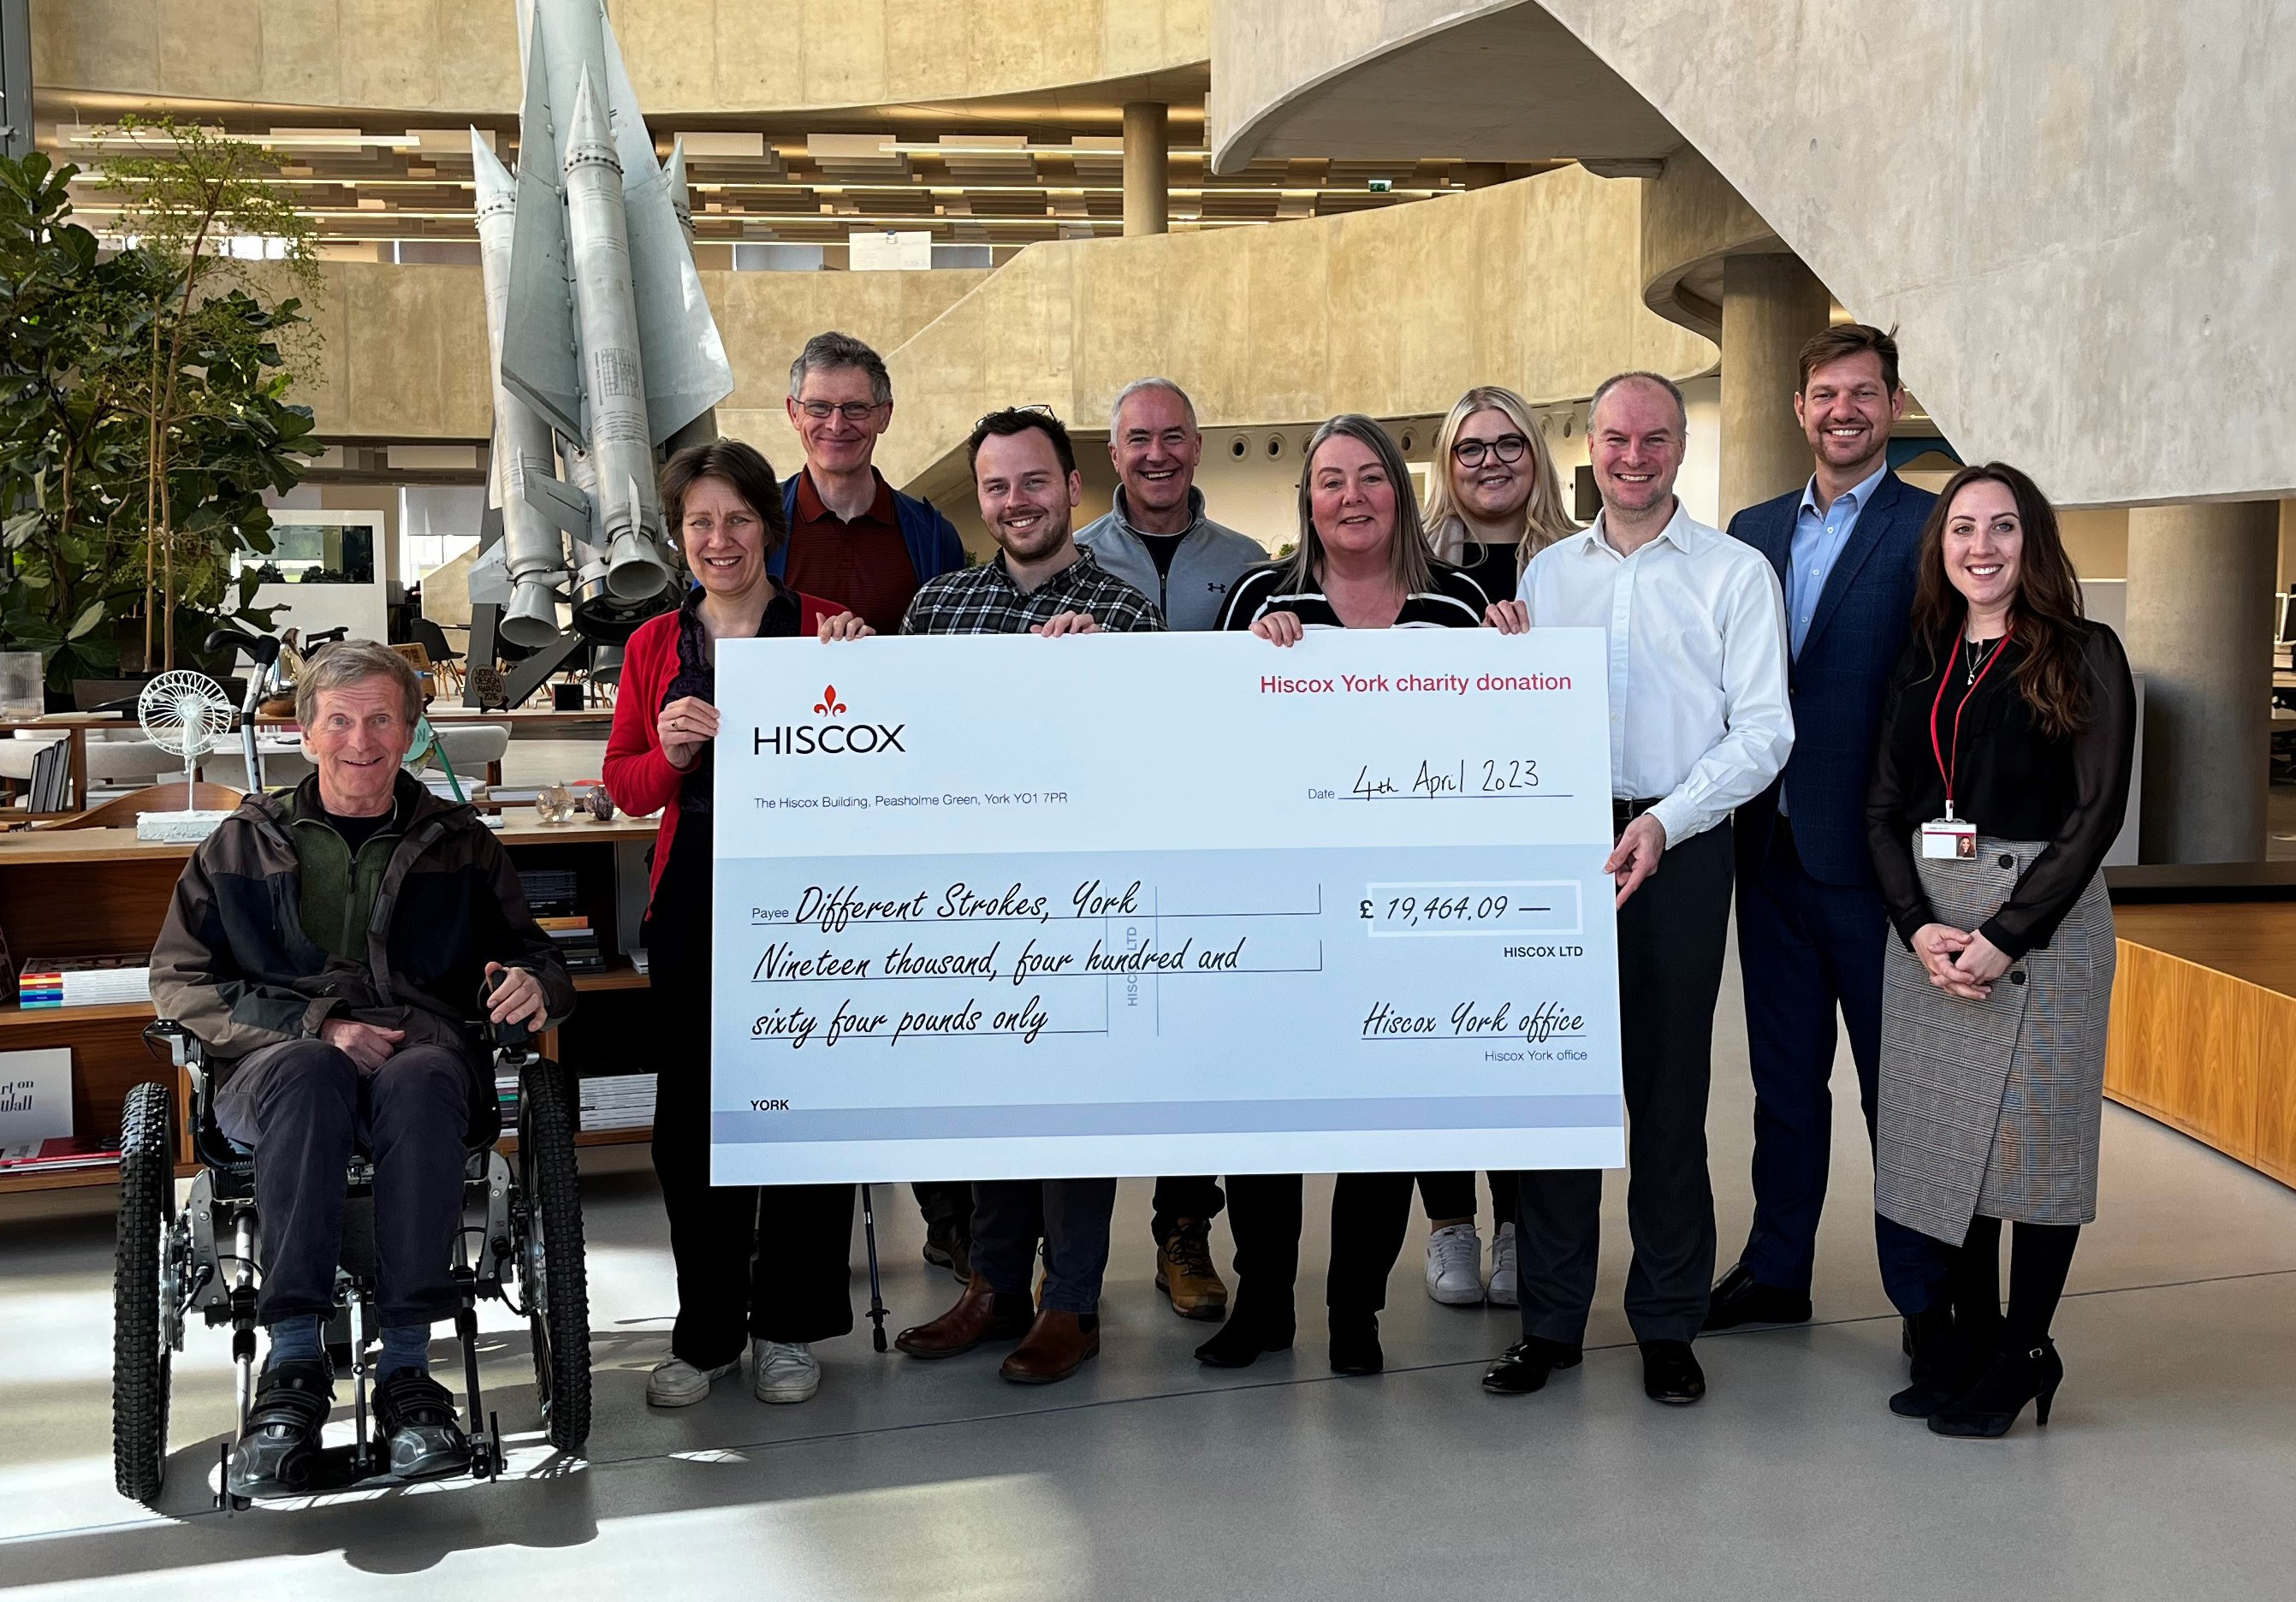 Hiscox York employees present a cheque for almost £20,000 to Different Strokes